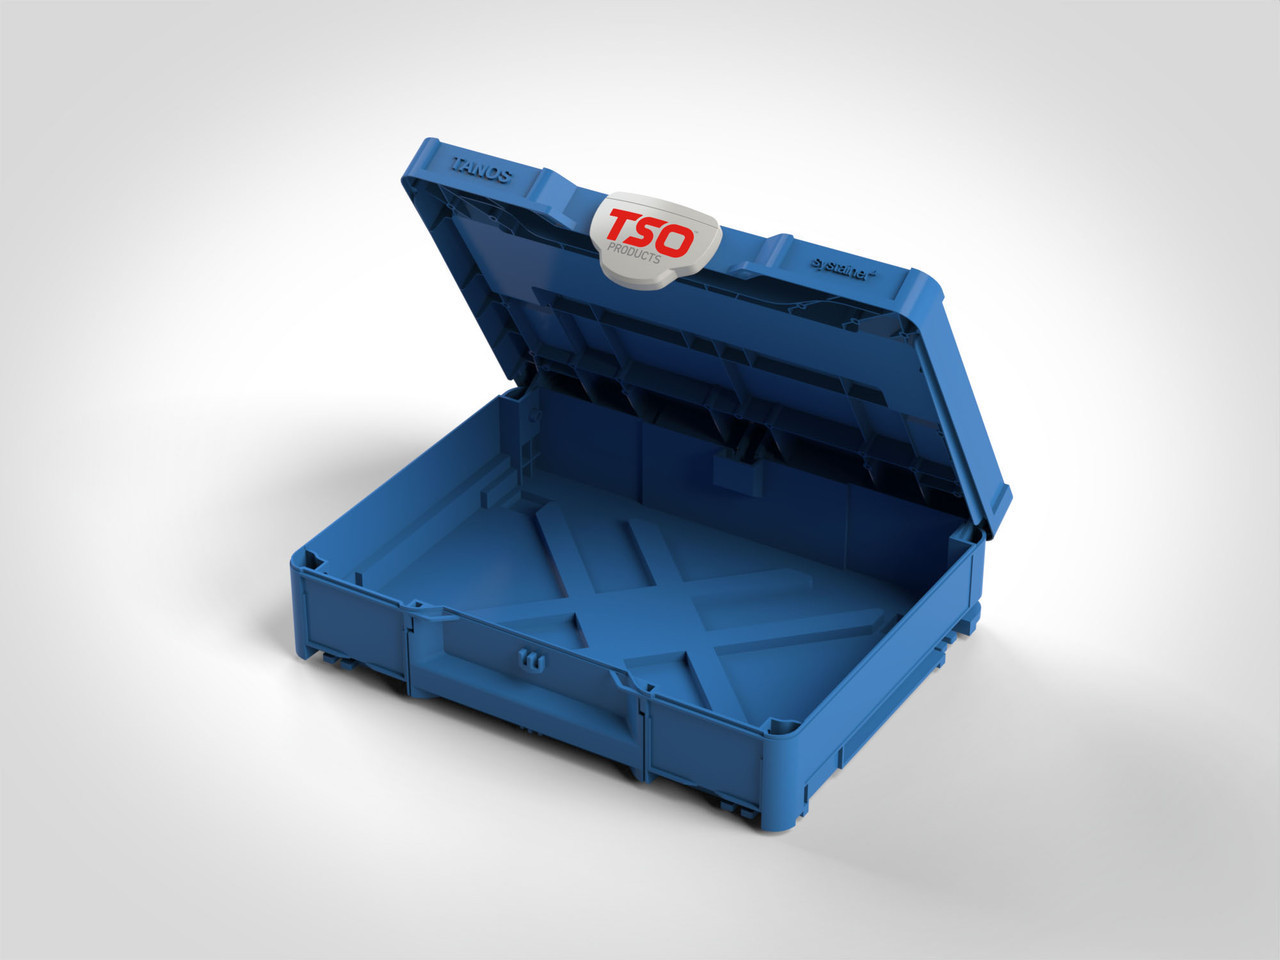 Sample transport medical suitcase - Box-systainer® T-Loc I - TANOS